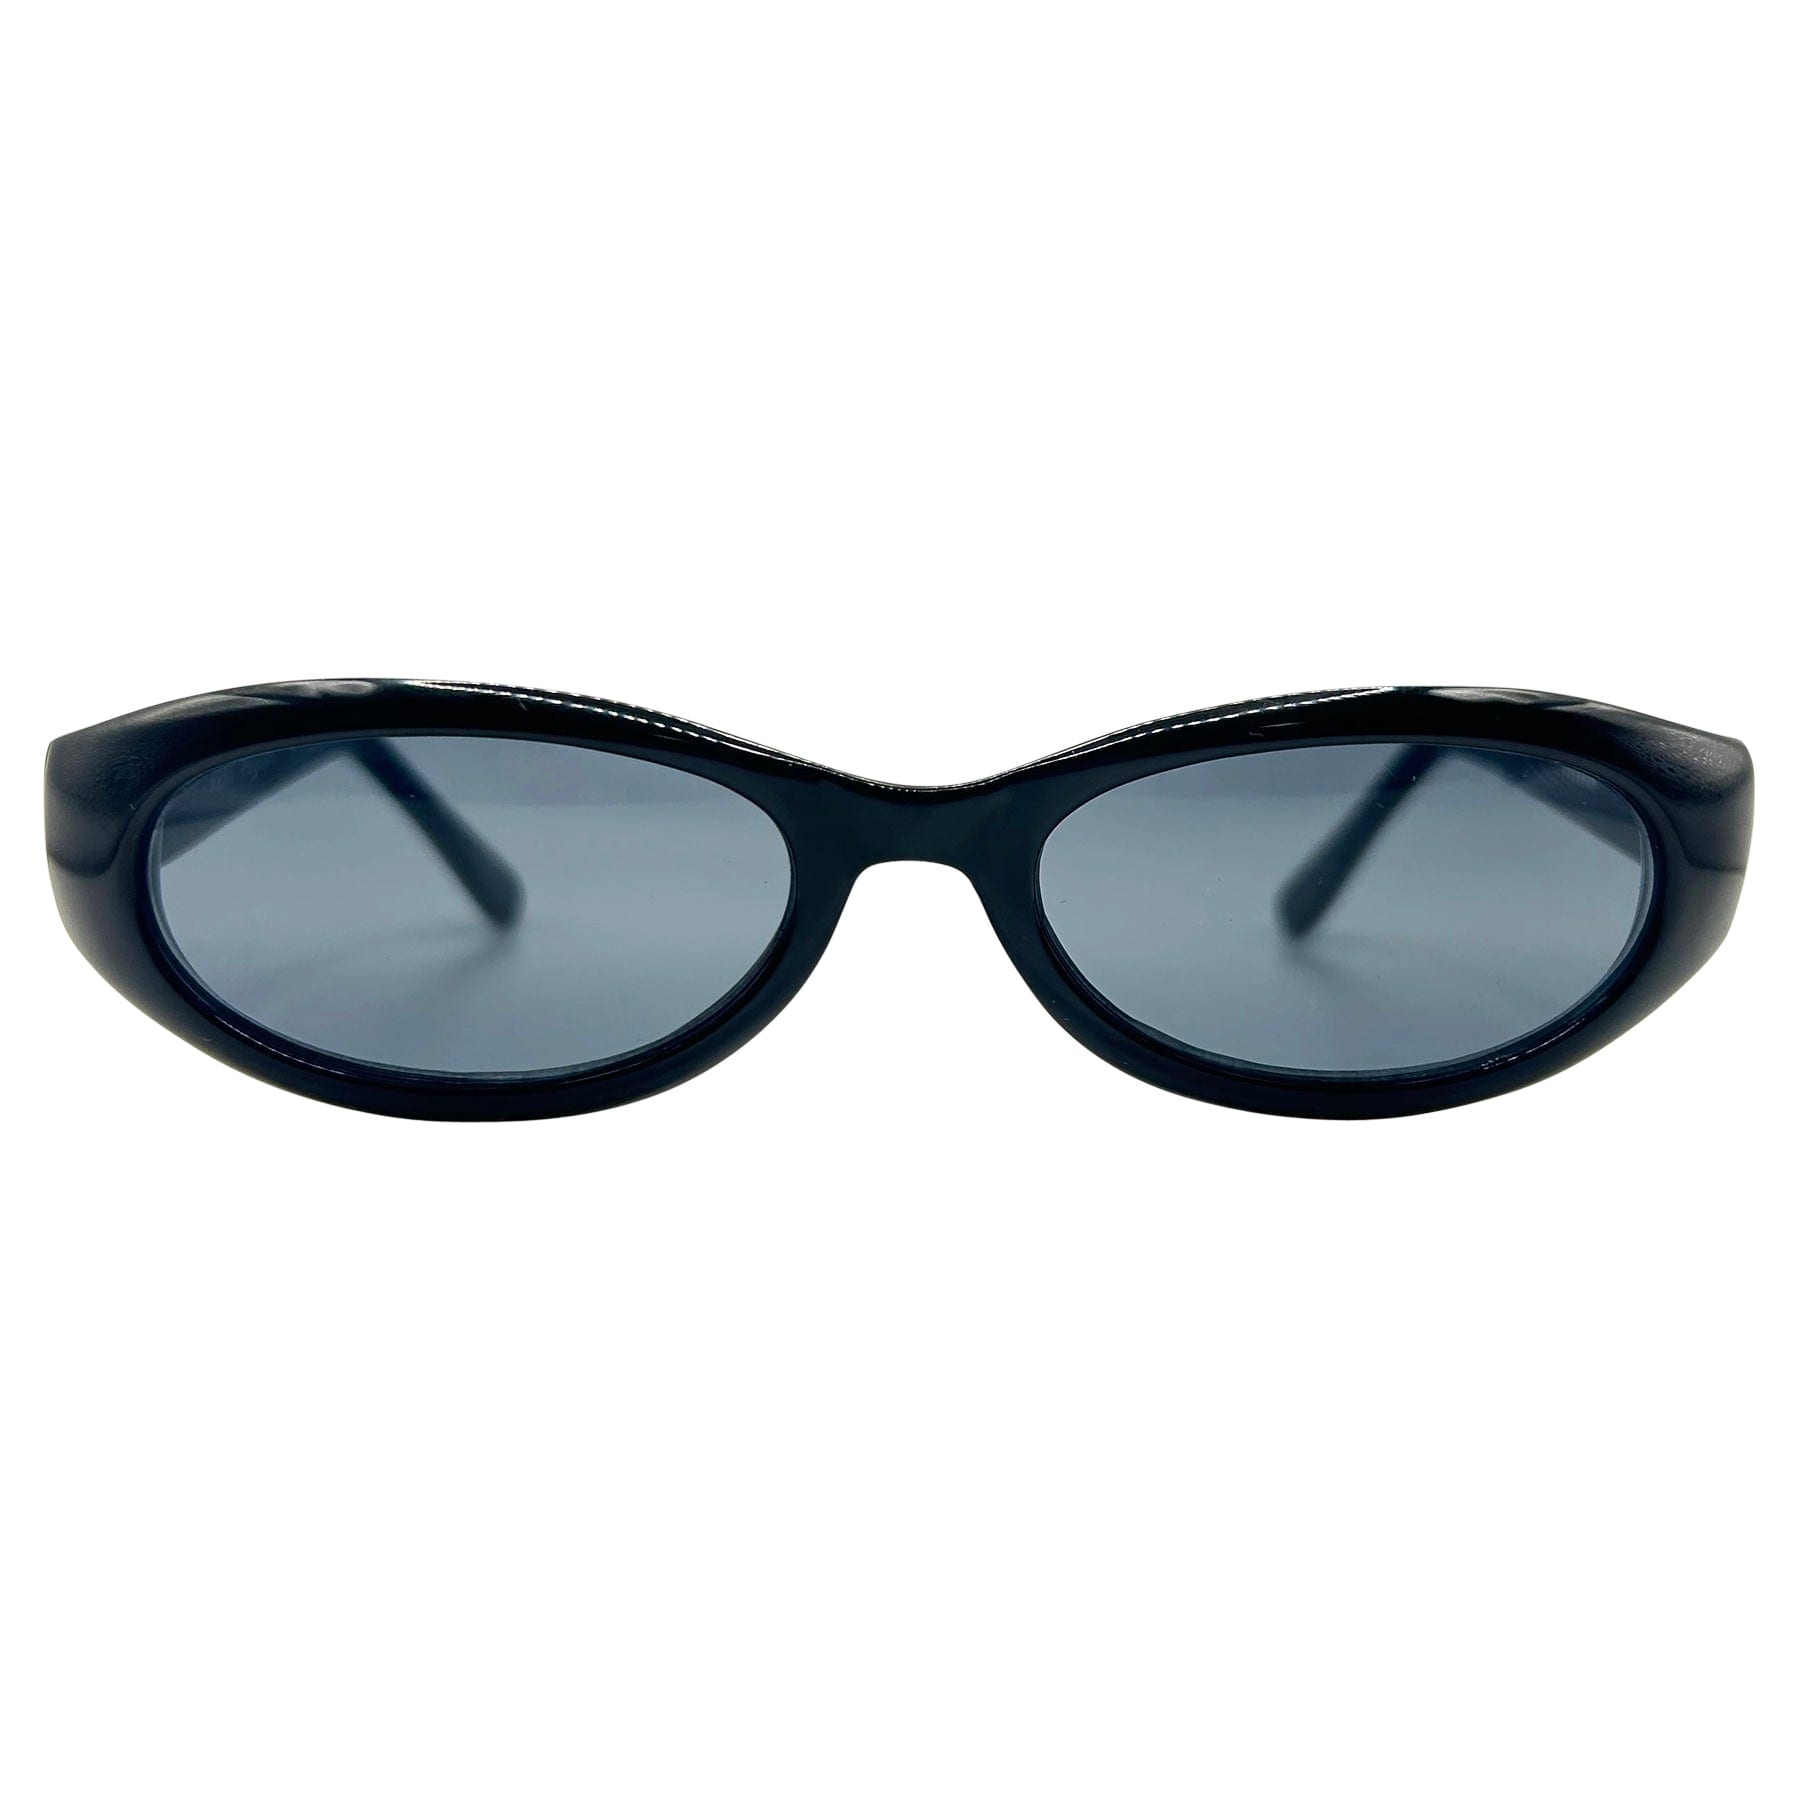 unisex and male sunglasses with a 90 style frame